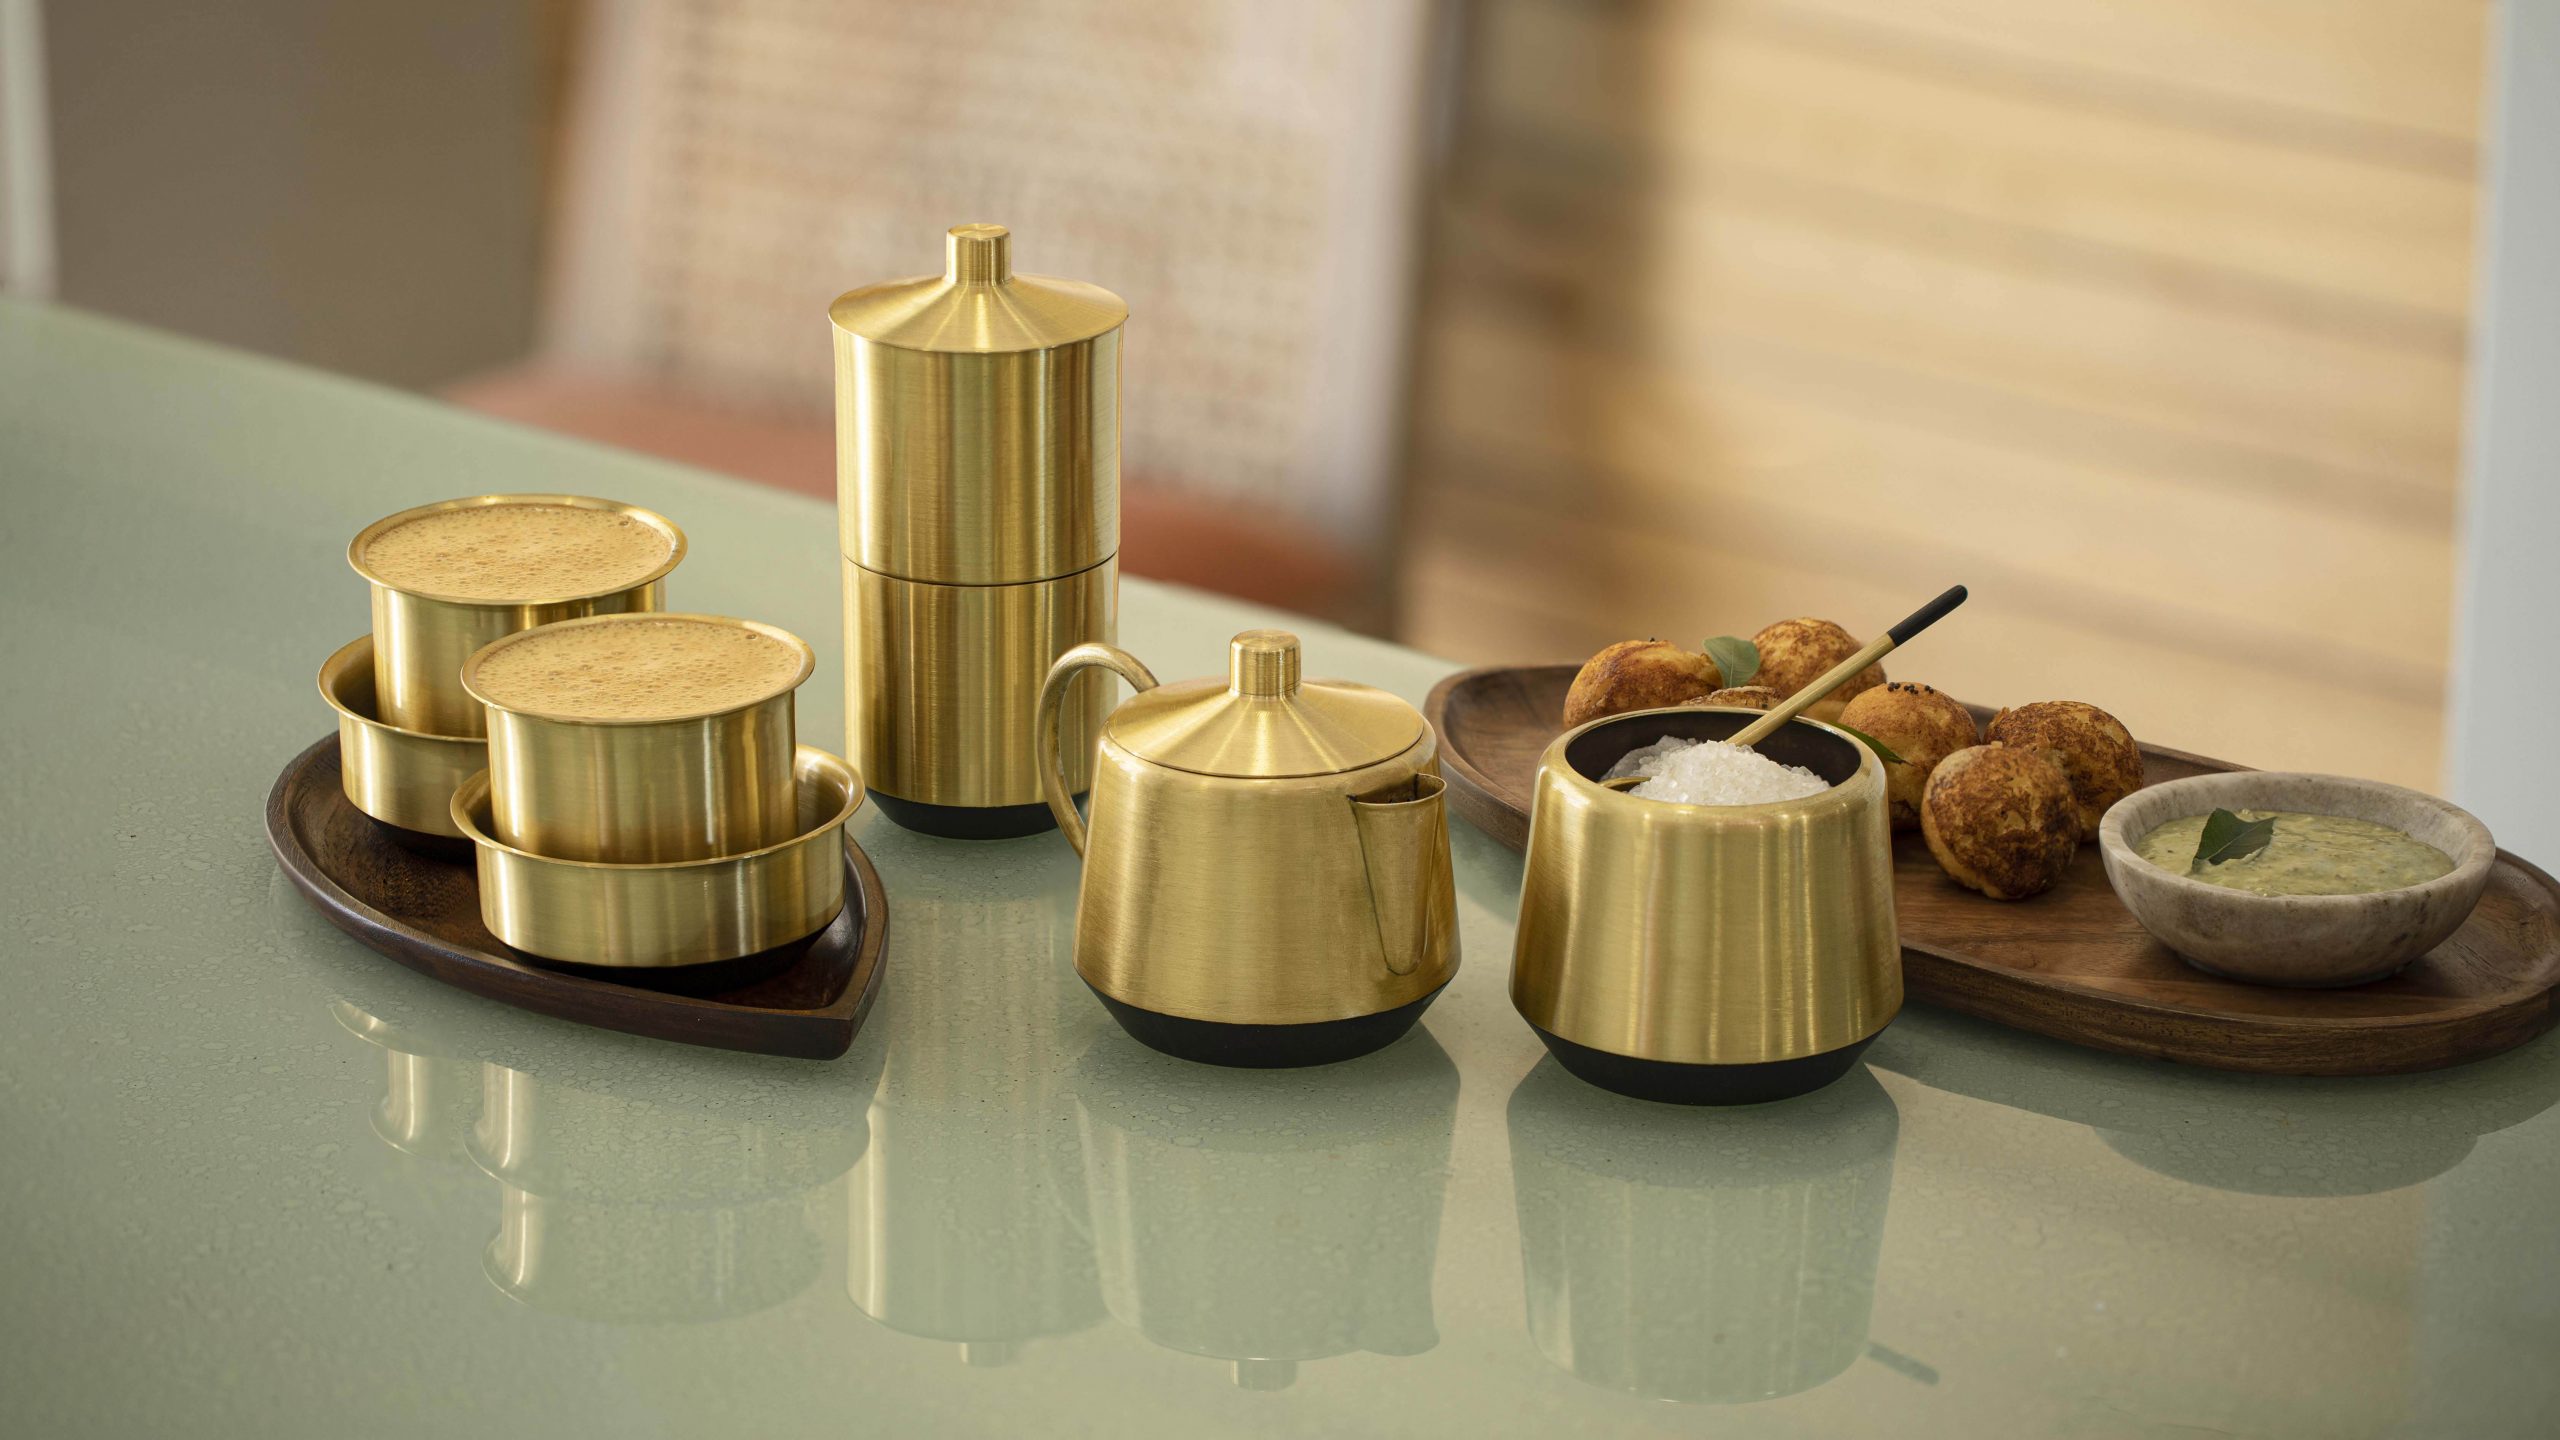 Essential Traditions - Have you checked our handmade brass and bronze  collection. We've got everything from brass coffee filters to tin lined  brass cooking/storage vessels. Cooking and eating the food made in